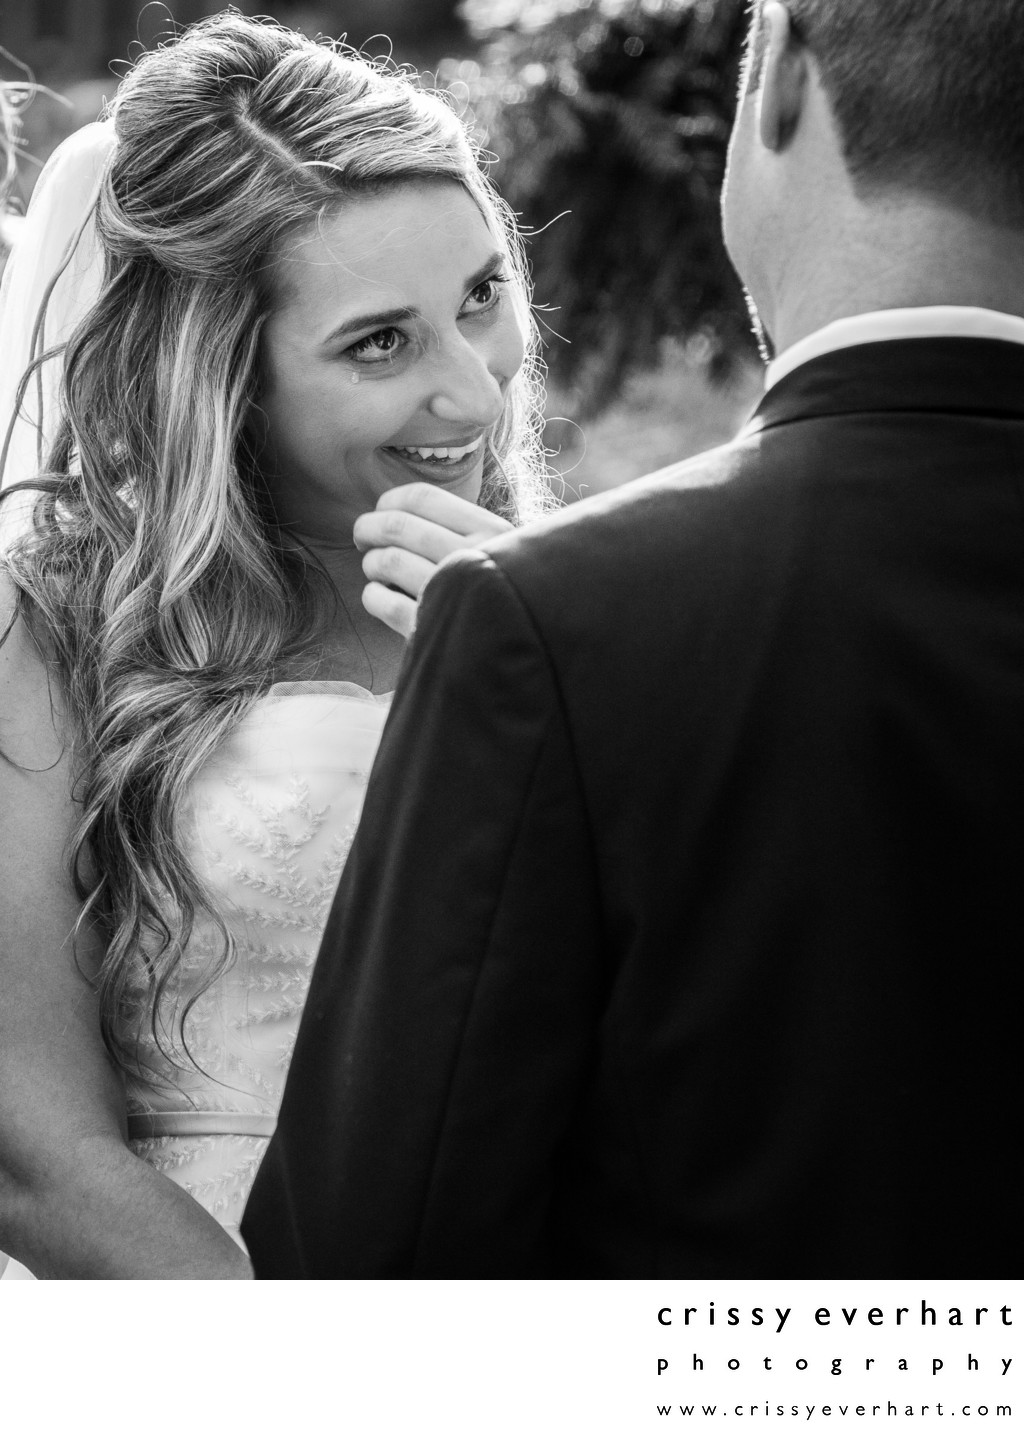 Bride Wipes Tear During Wedding Ceremony Vows